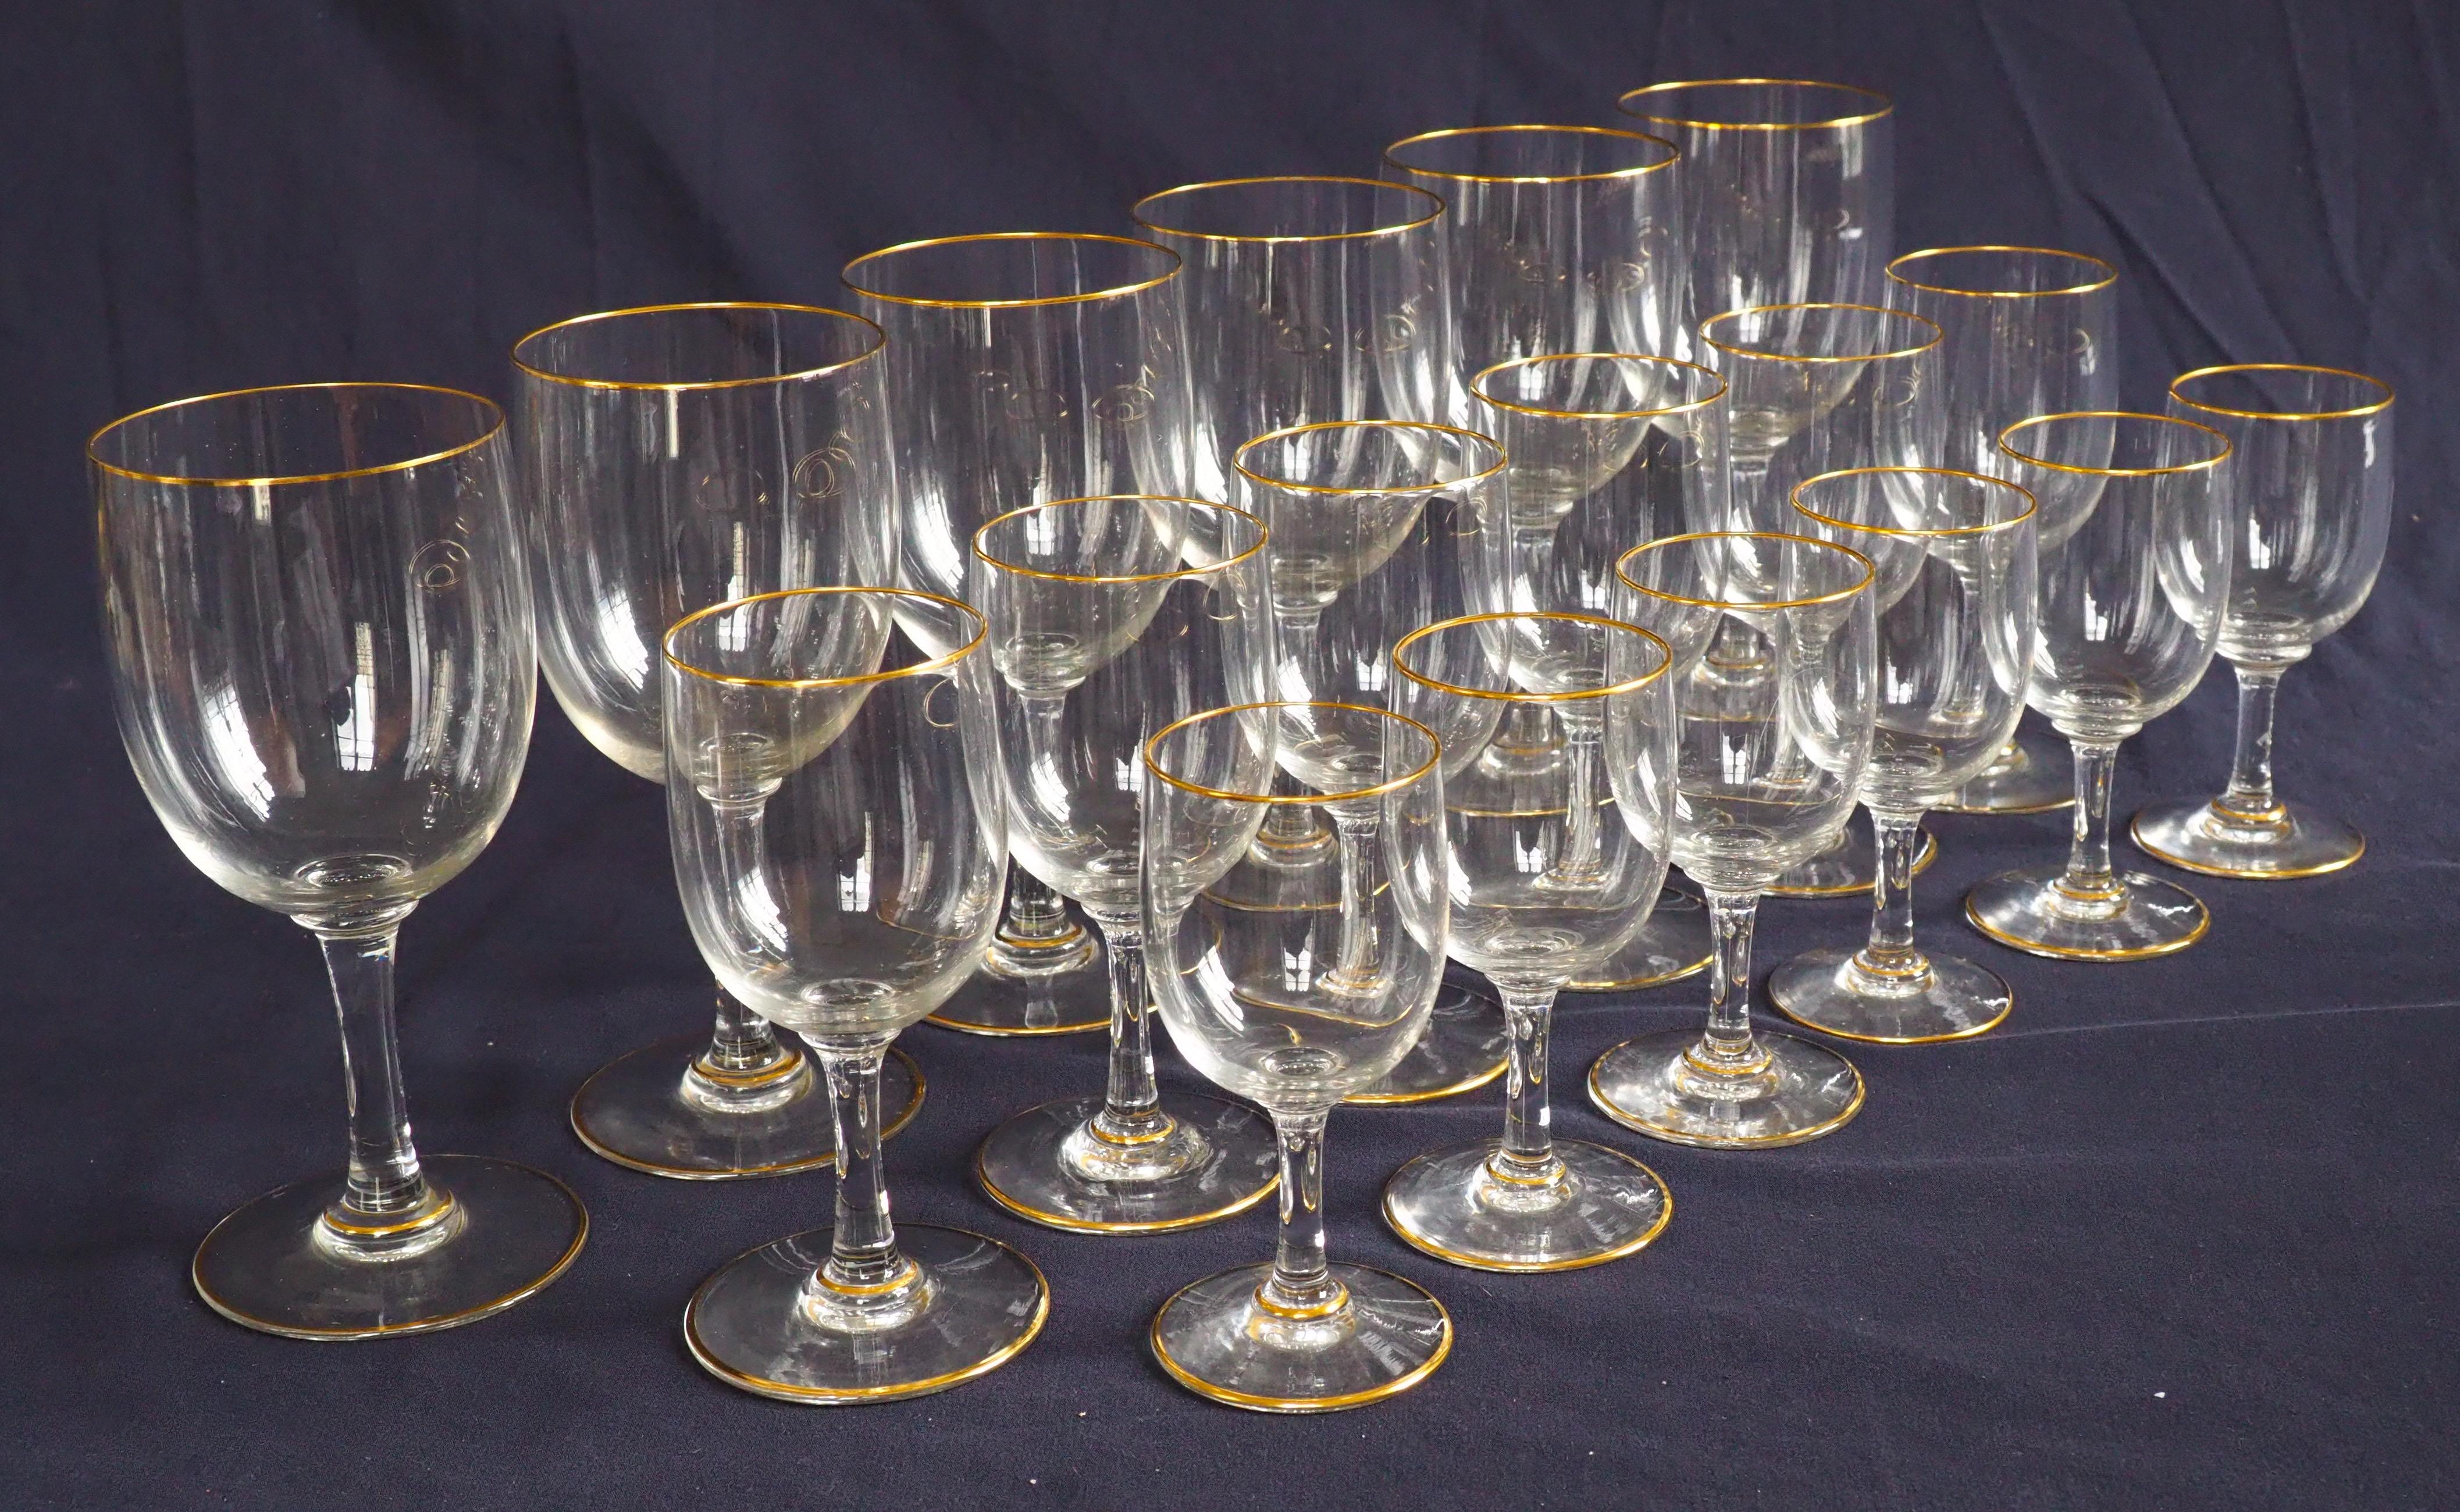 Set of 3 Baccarat crystal glasses - France - Perfection model enhanced with gold 4